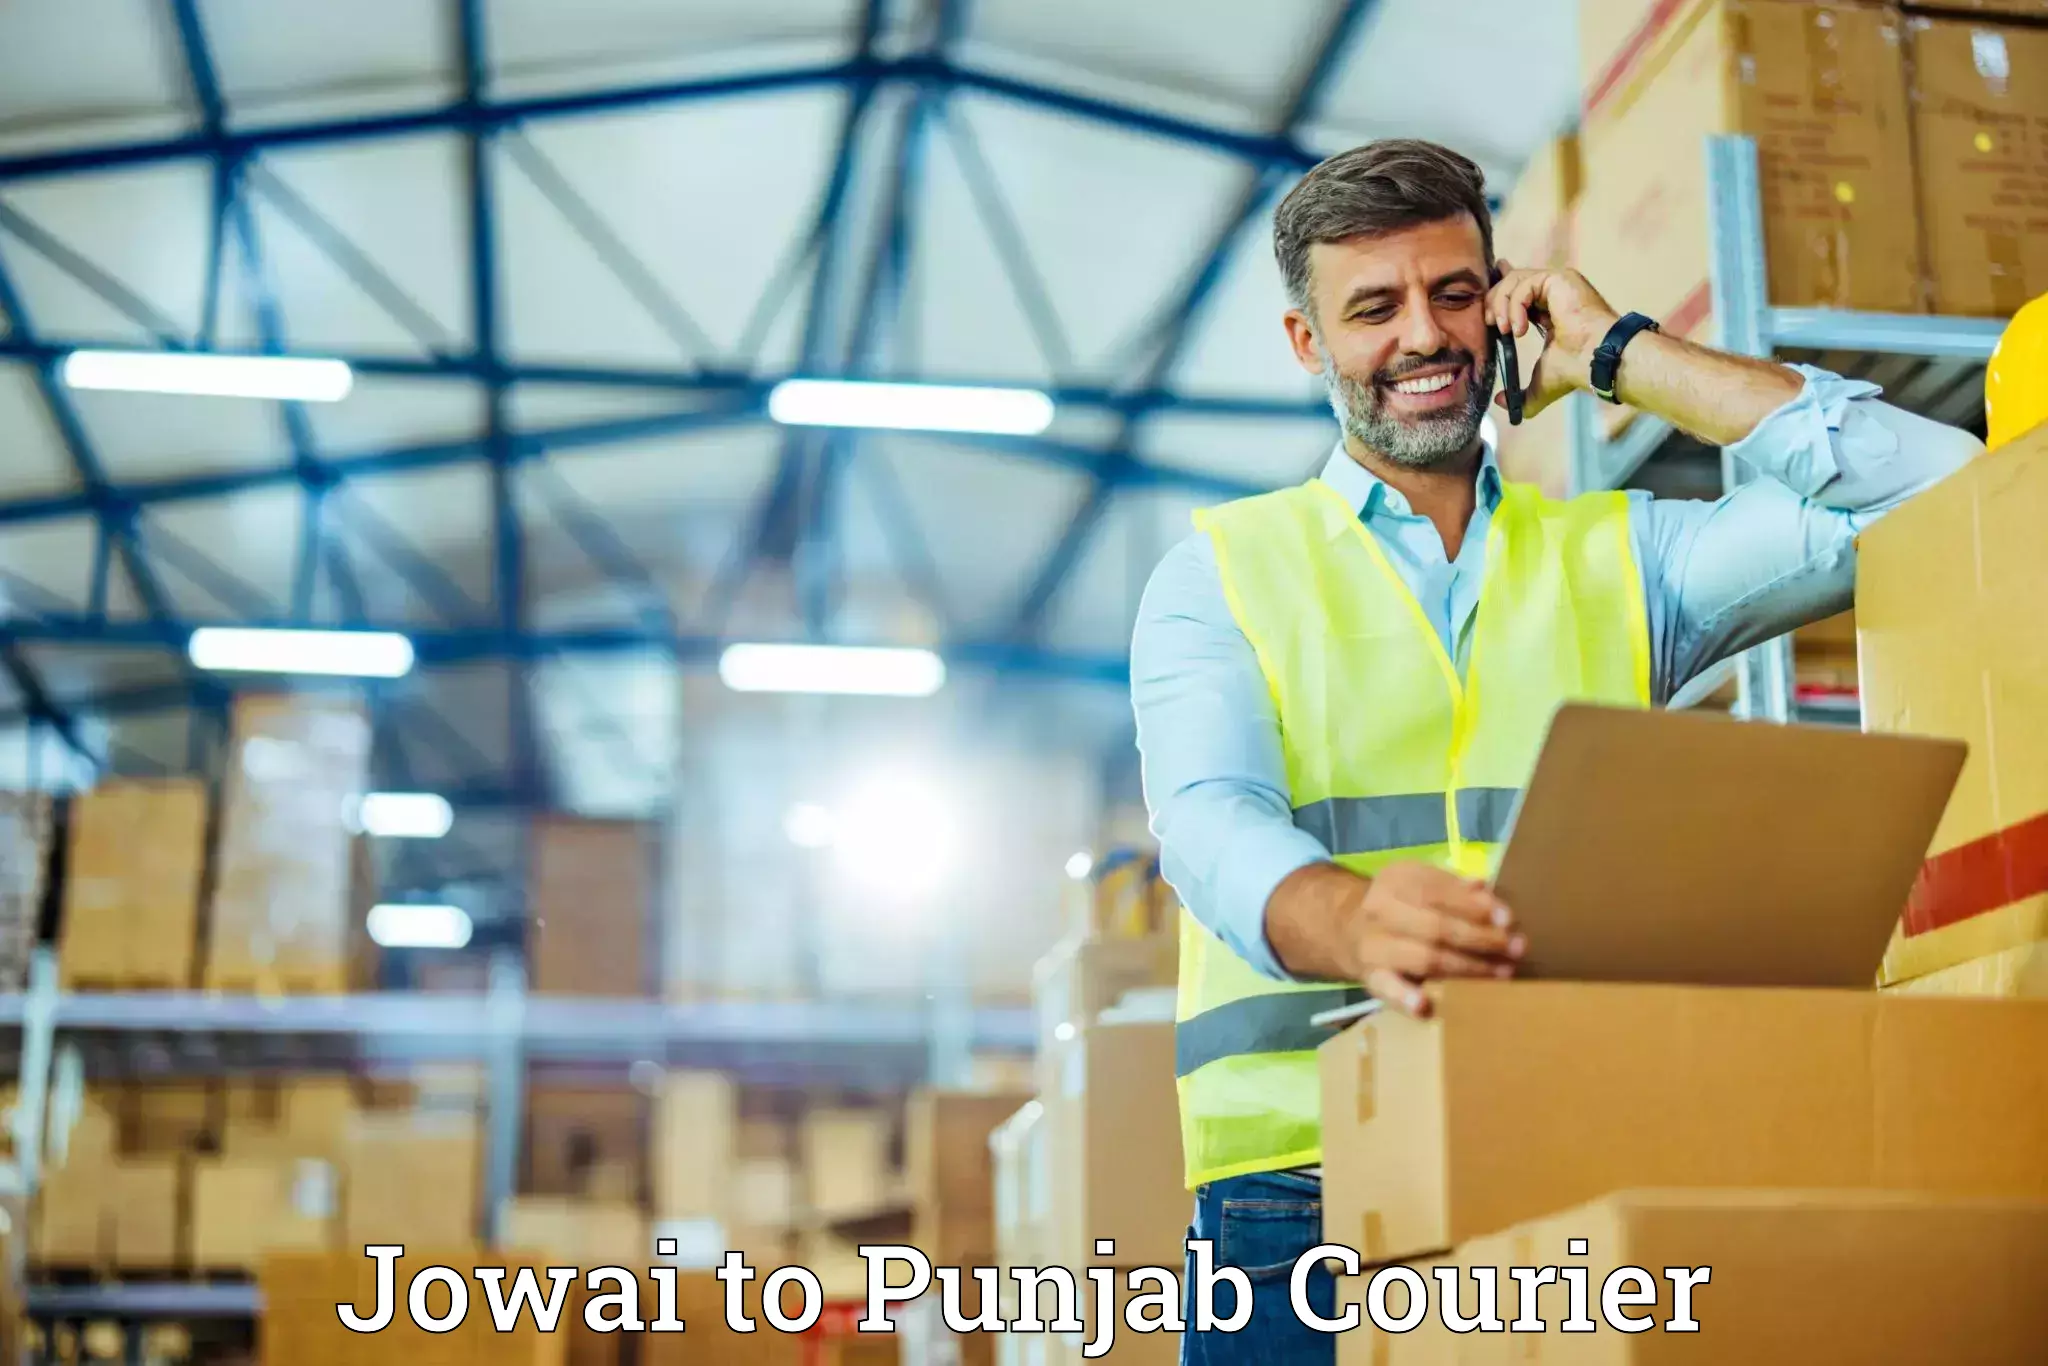 Comprehensive relocation services Jowai to Malout